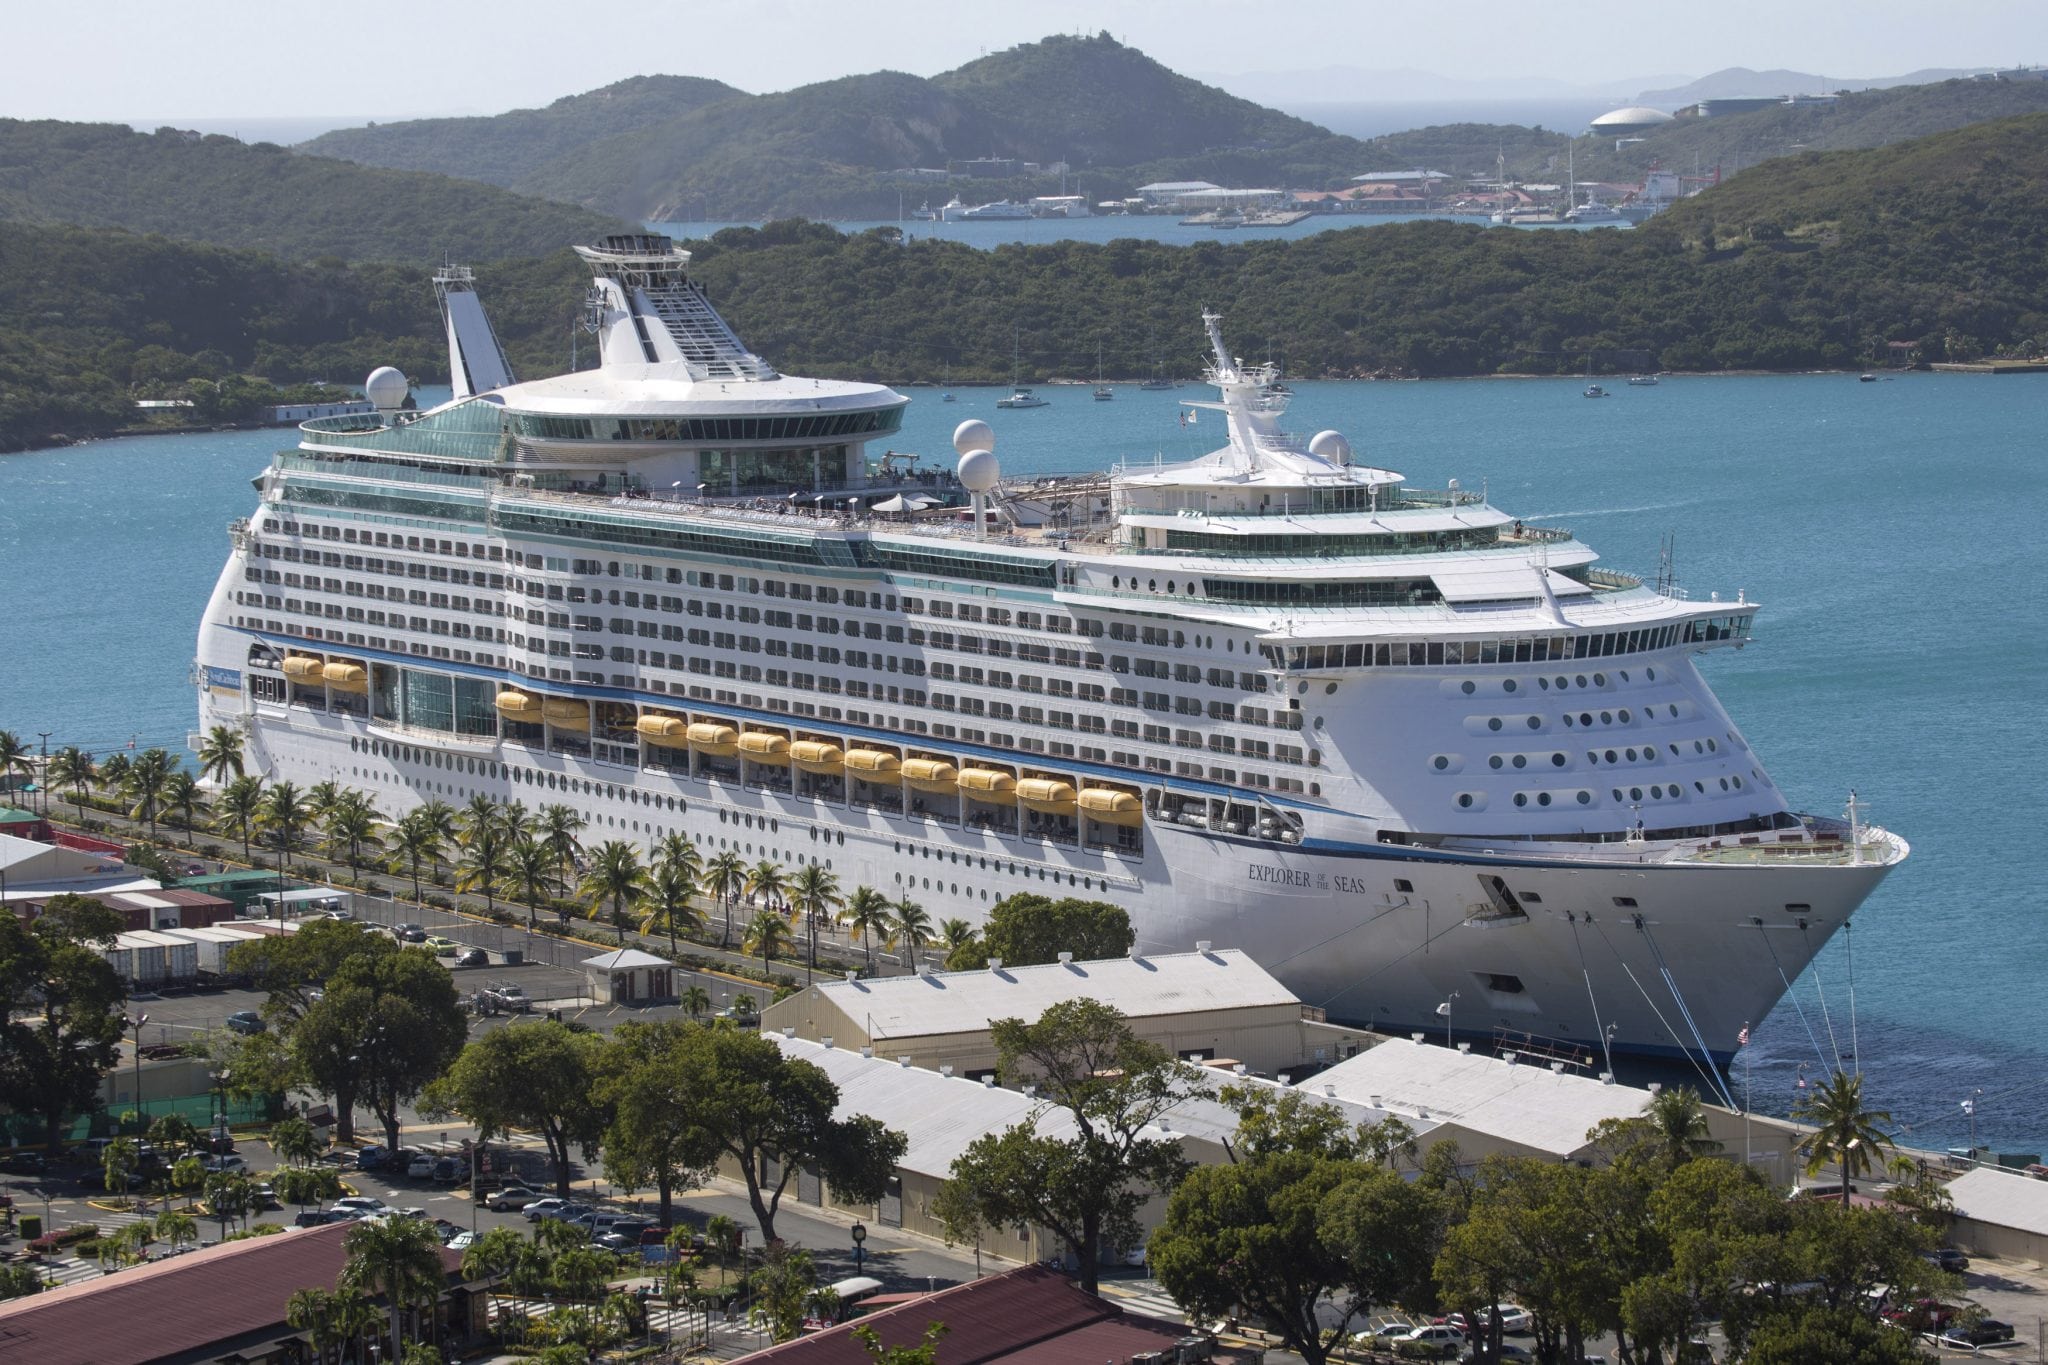 The Royal Caribbean International's Explorer of the Seas is shown in St. Thomas, U. S. Virgin Islands. The Zika virus has spread throughout the Caribbean, including the U.S. Virgin Islands.